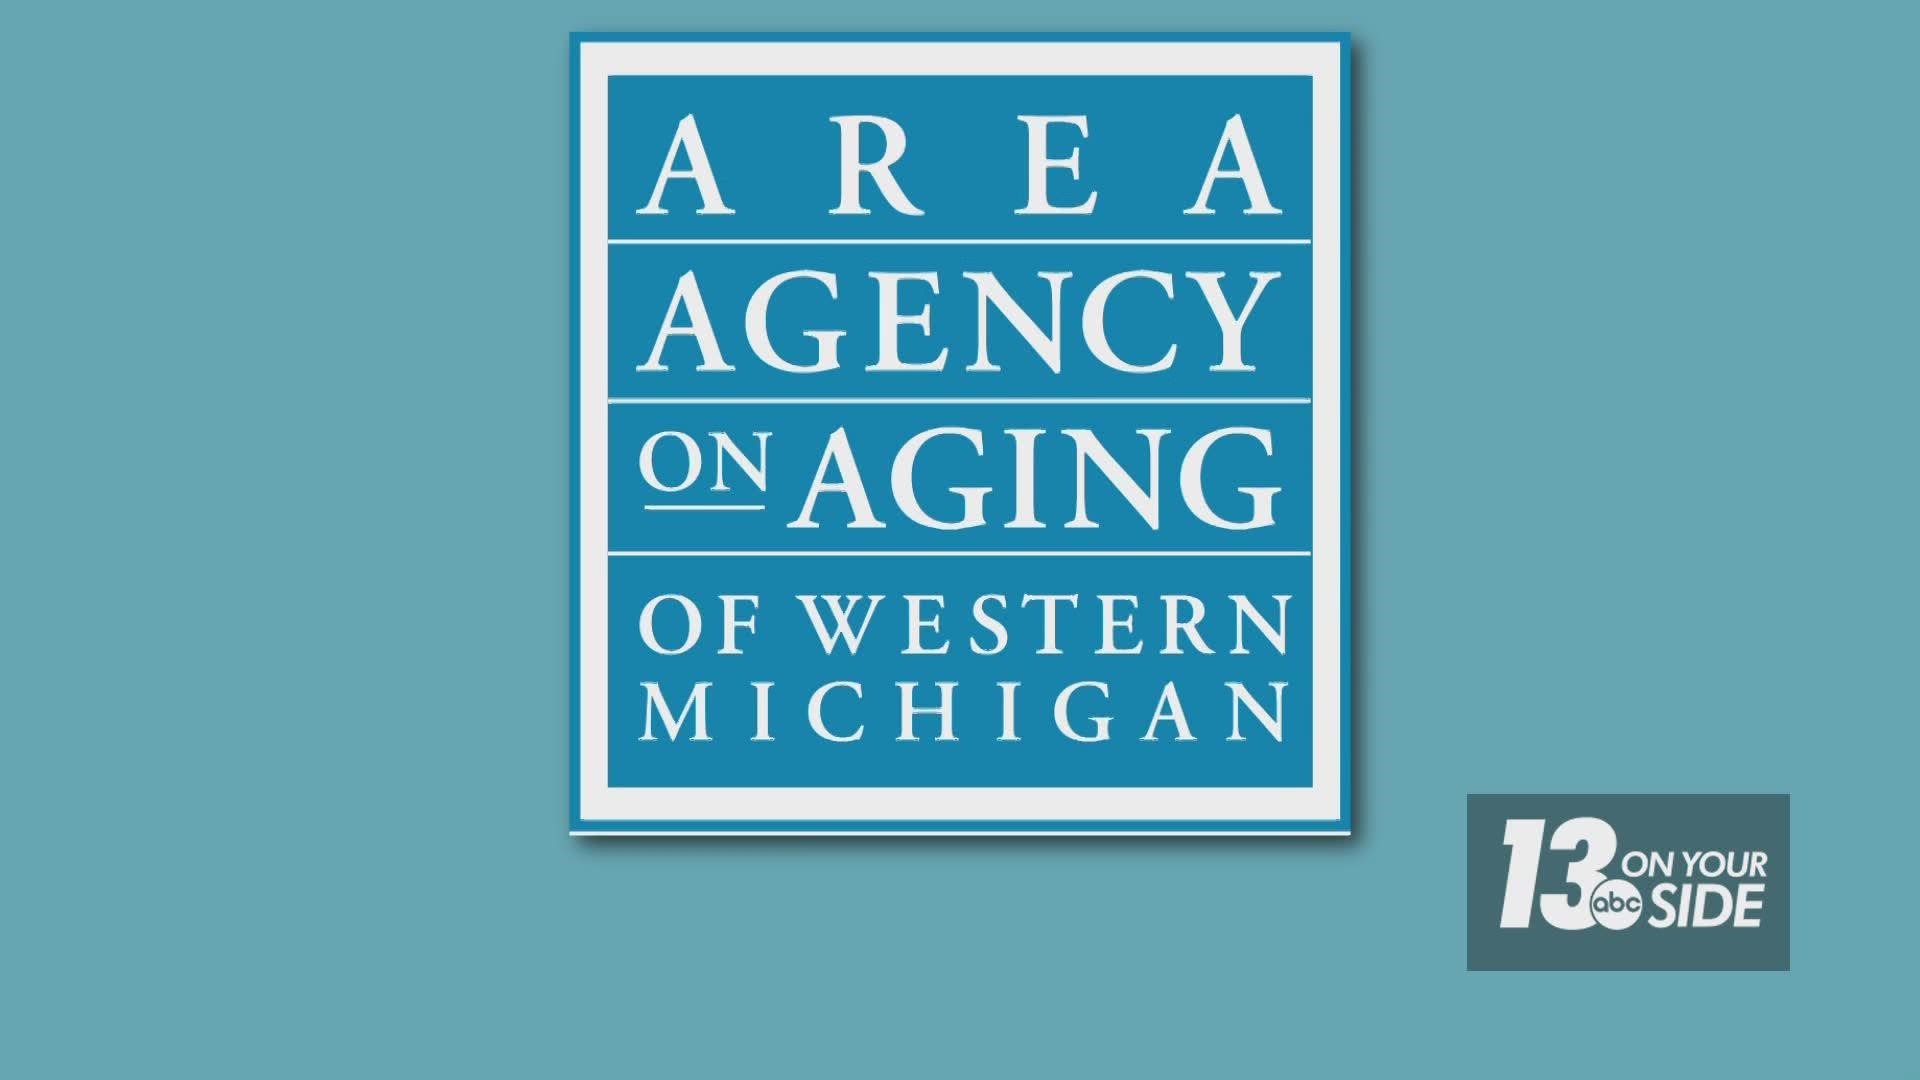 The Area Agencies on Aging were created by the United States Congress back in the 1970’s to provide seniors with home and community-based services.